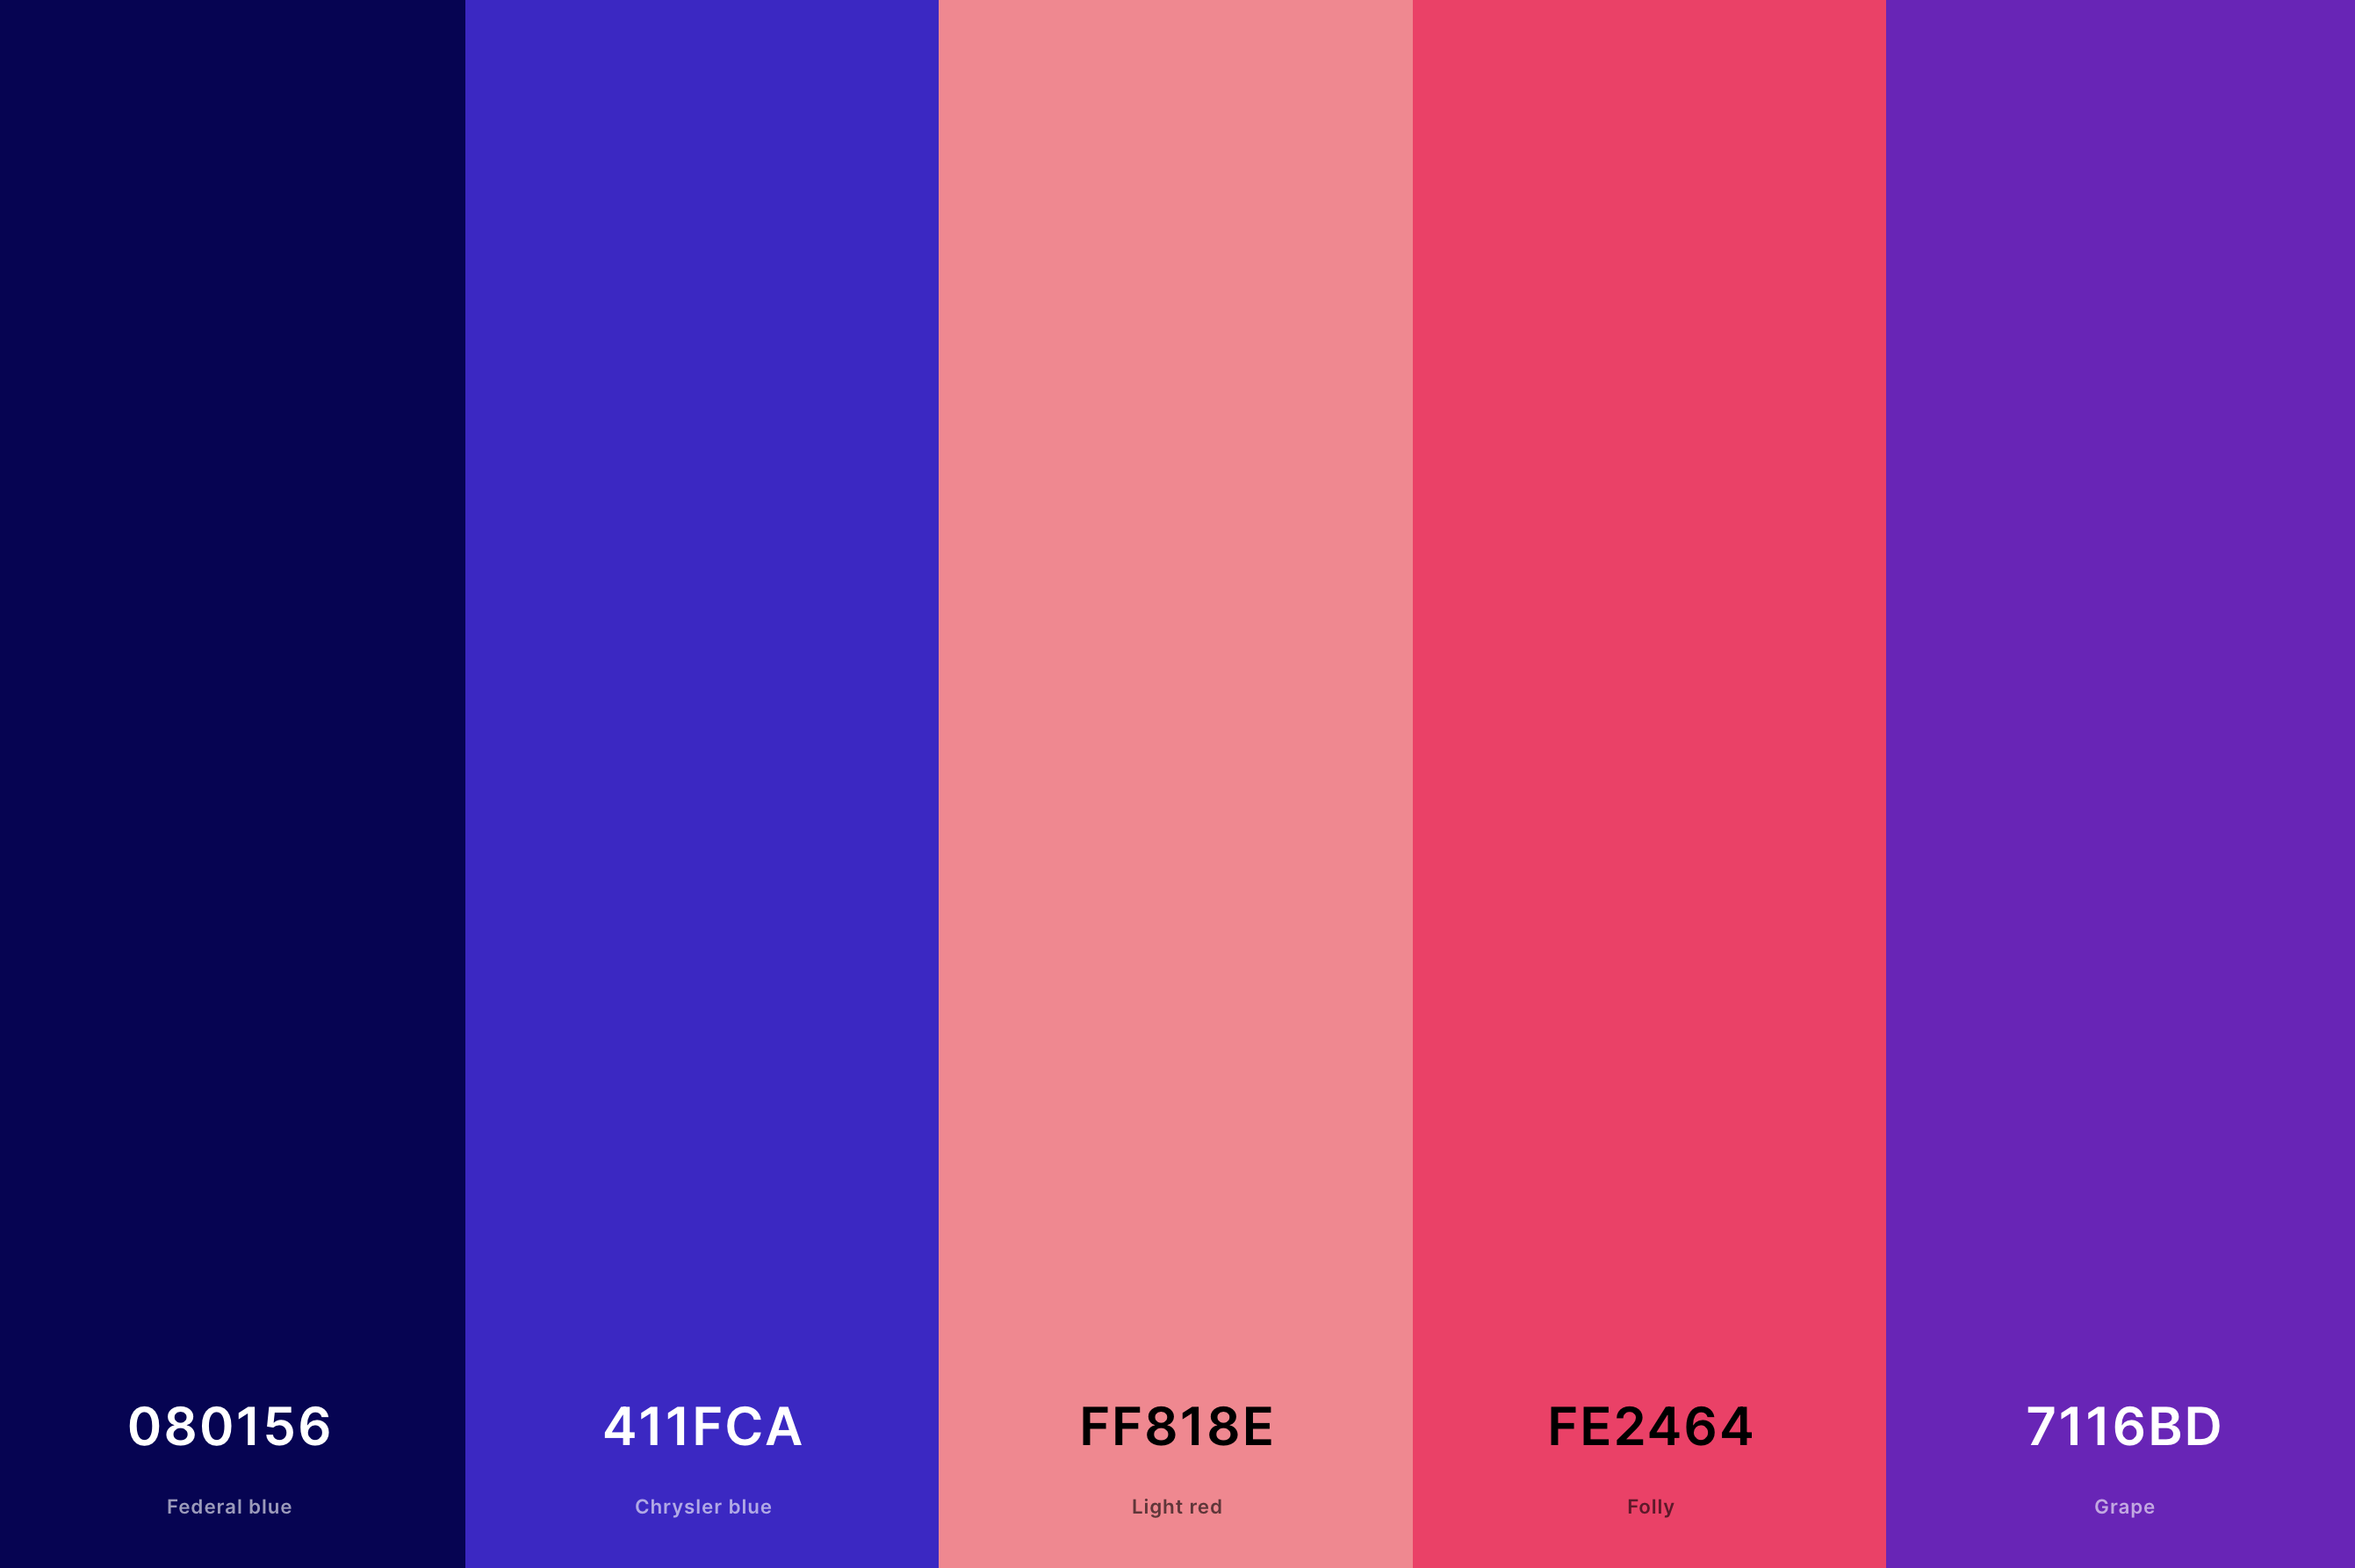 15. Retro Futuristic Color Palette Color Palette with Federal Blue (Hex #080156) + Chrysler Blue (Hex #411FCA) + Light Red (Hex #FF818E) + Folly (Hex #FE2464) + Grape (Hex #7116BD) Color Palette with Hex Codes